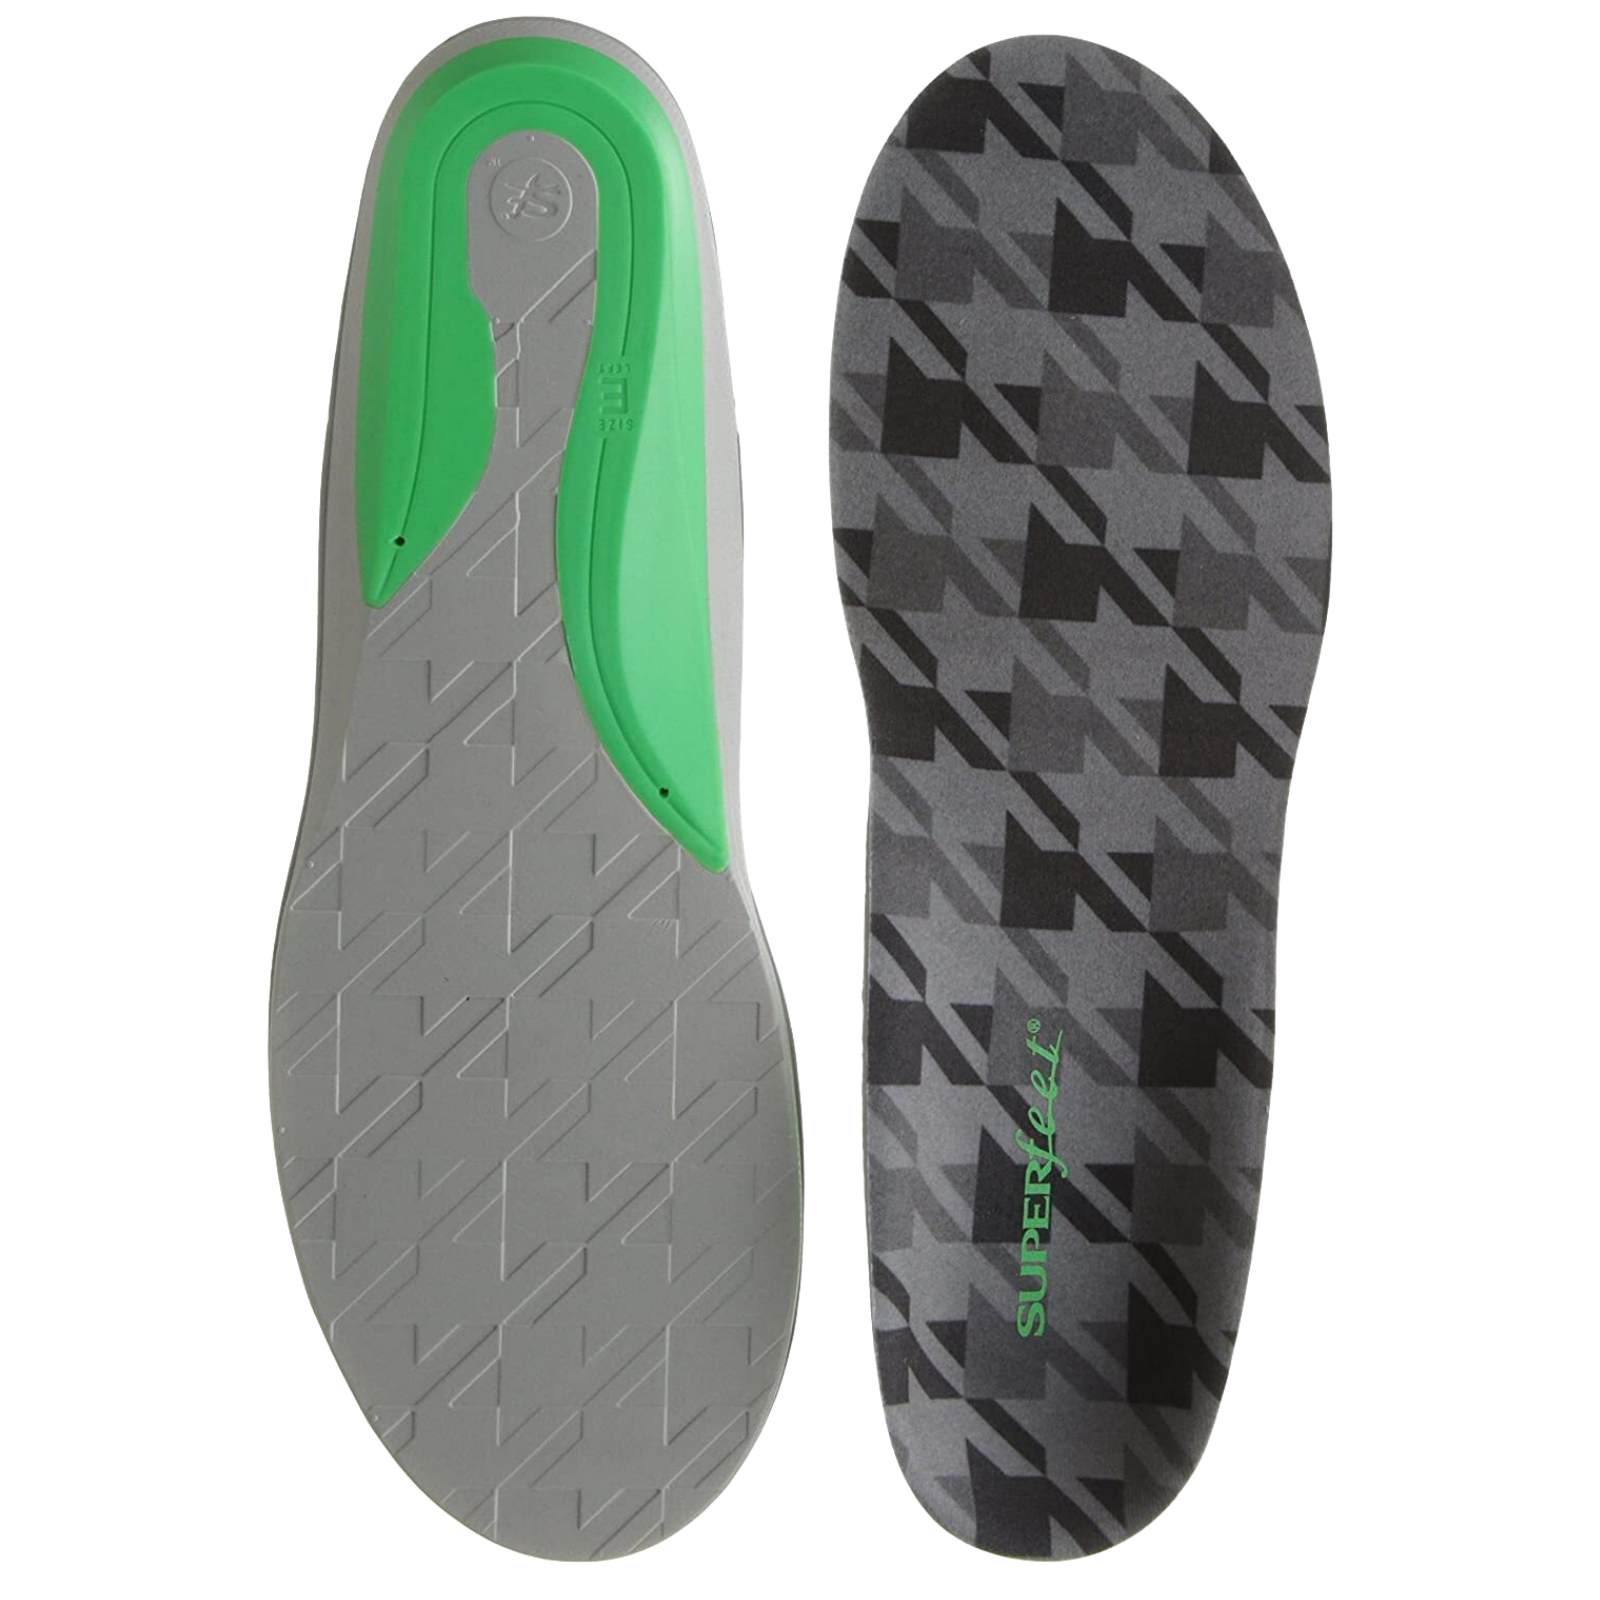 Mens Superfeet Me Full Length Insoles Inserts Orthotics Arch Support Cushion